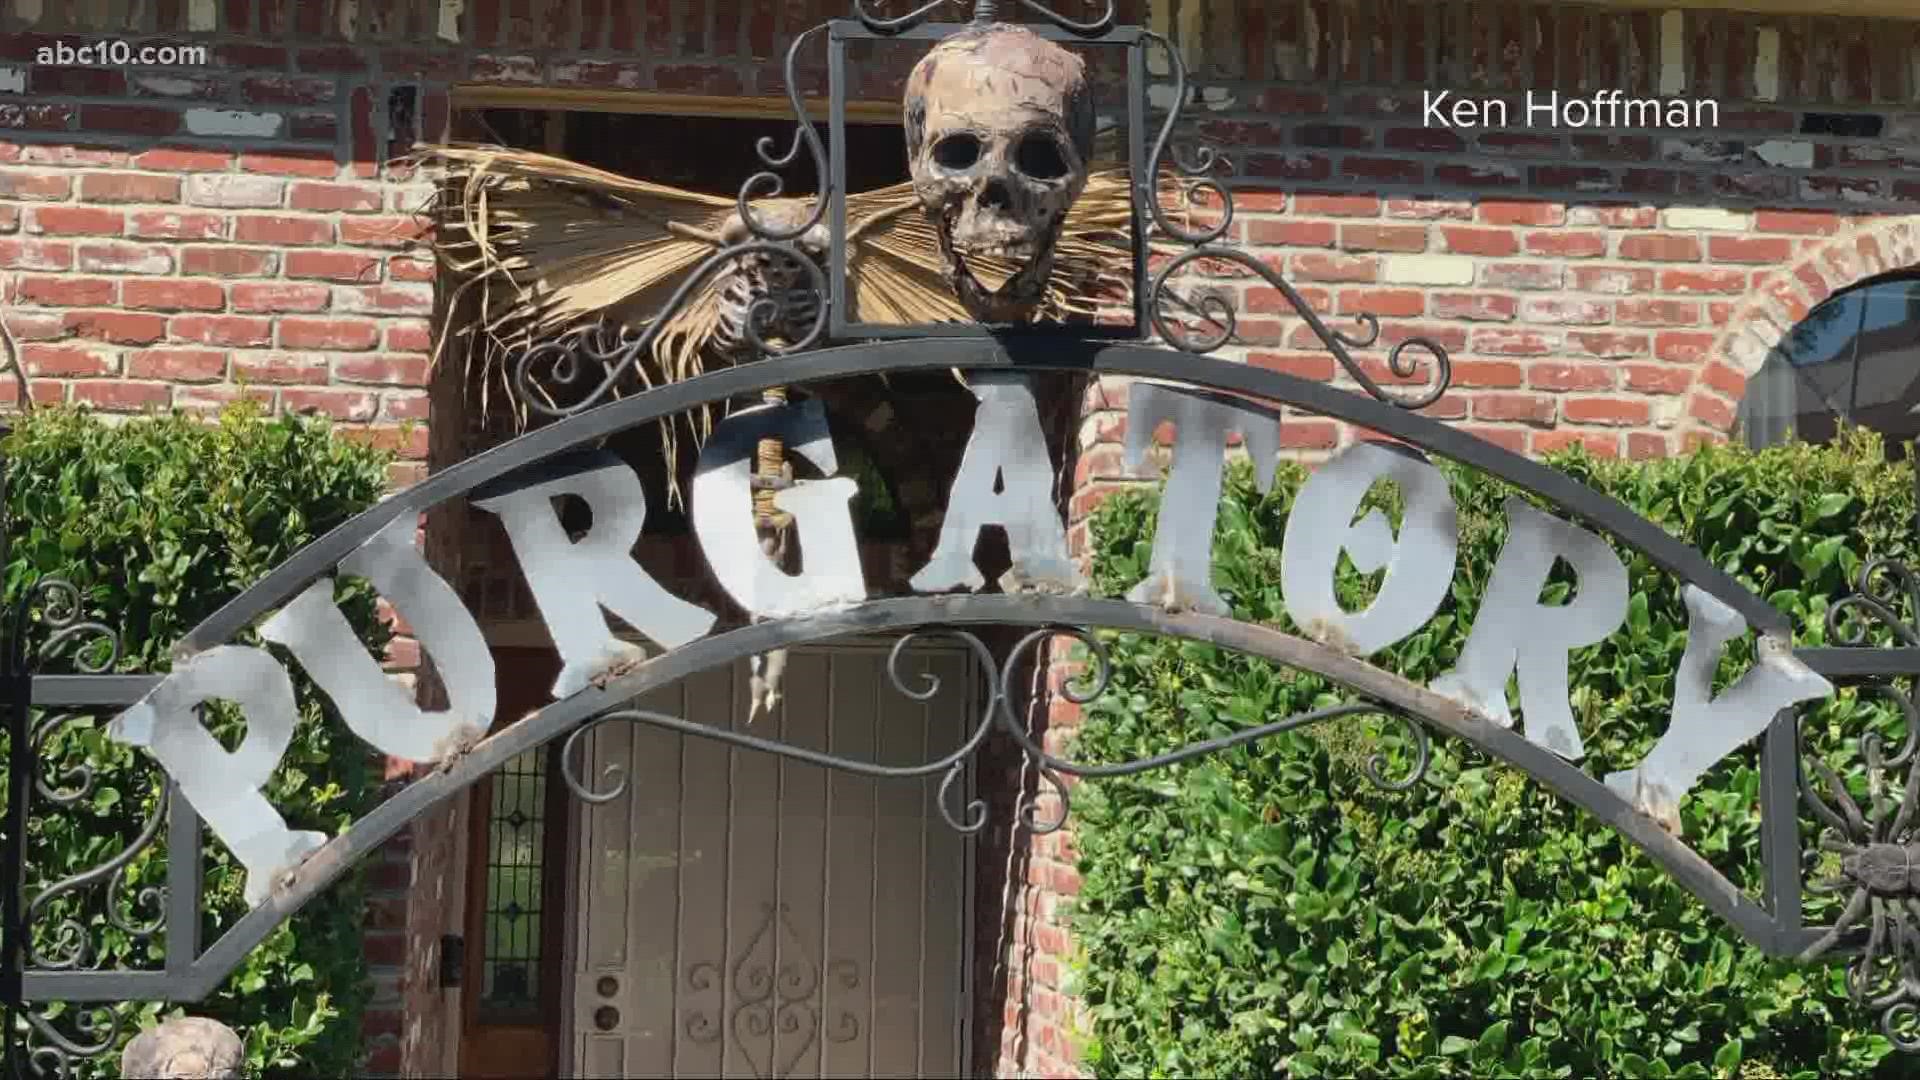 Ken Hoffman is heading toward Halloween in style. The Roseville man has spent hundreds working on some sculptures that he says are inspired by B-level horror movies.